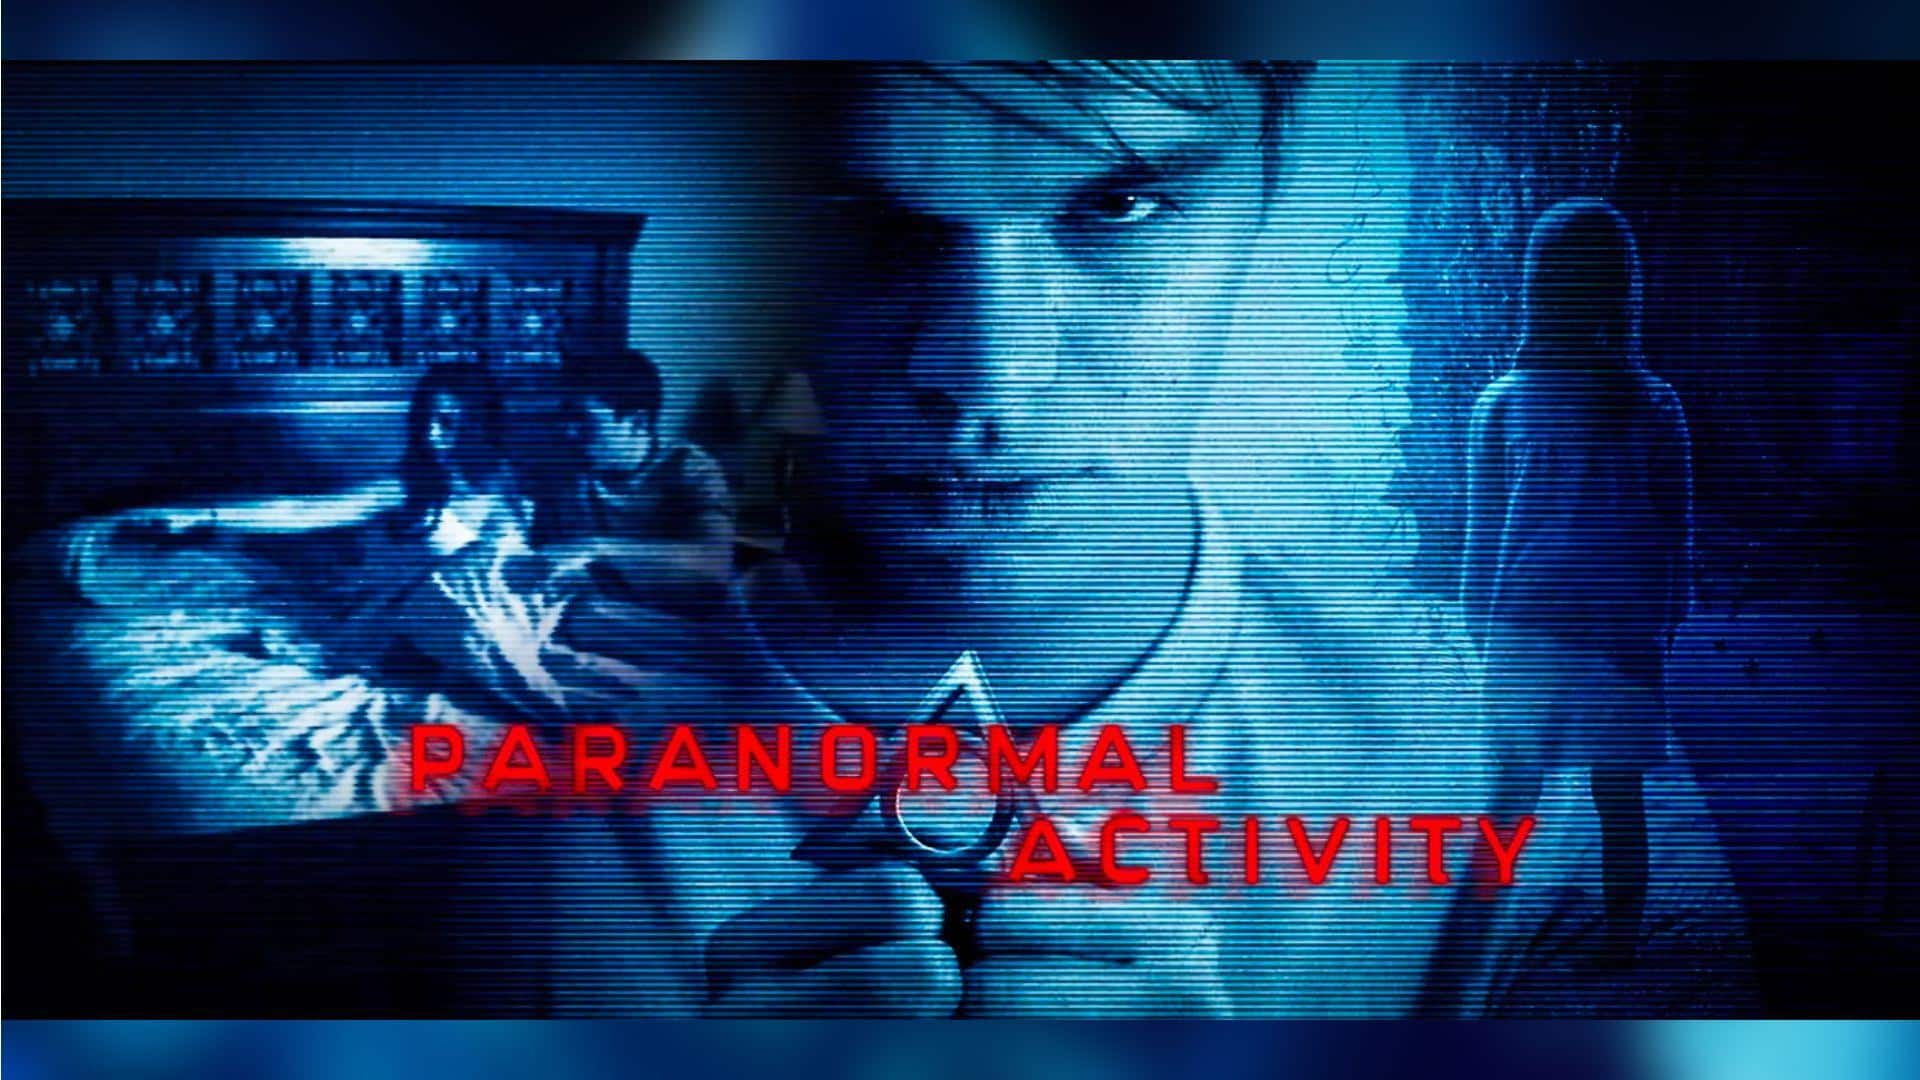 'Paranormal Activity' reimagined for live-stage: Revisiting horror franchise's best parts